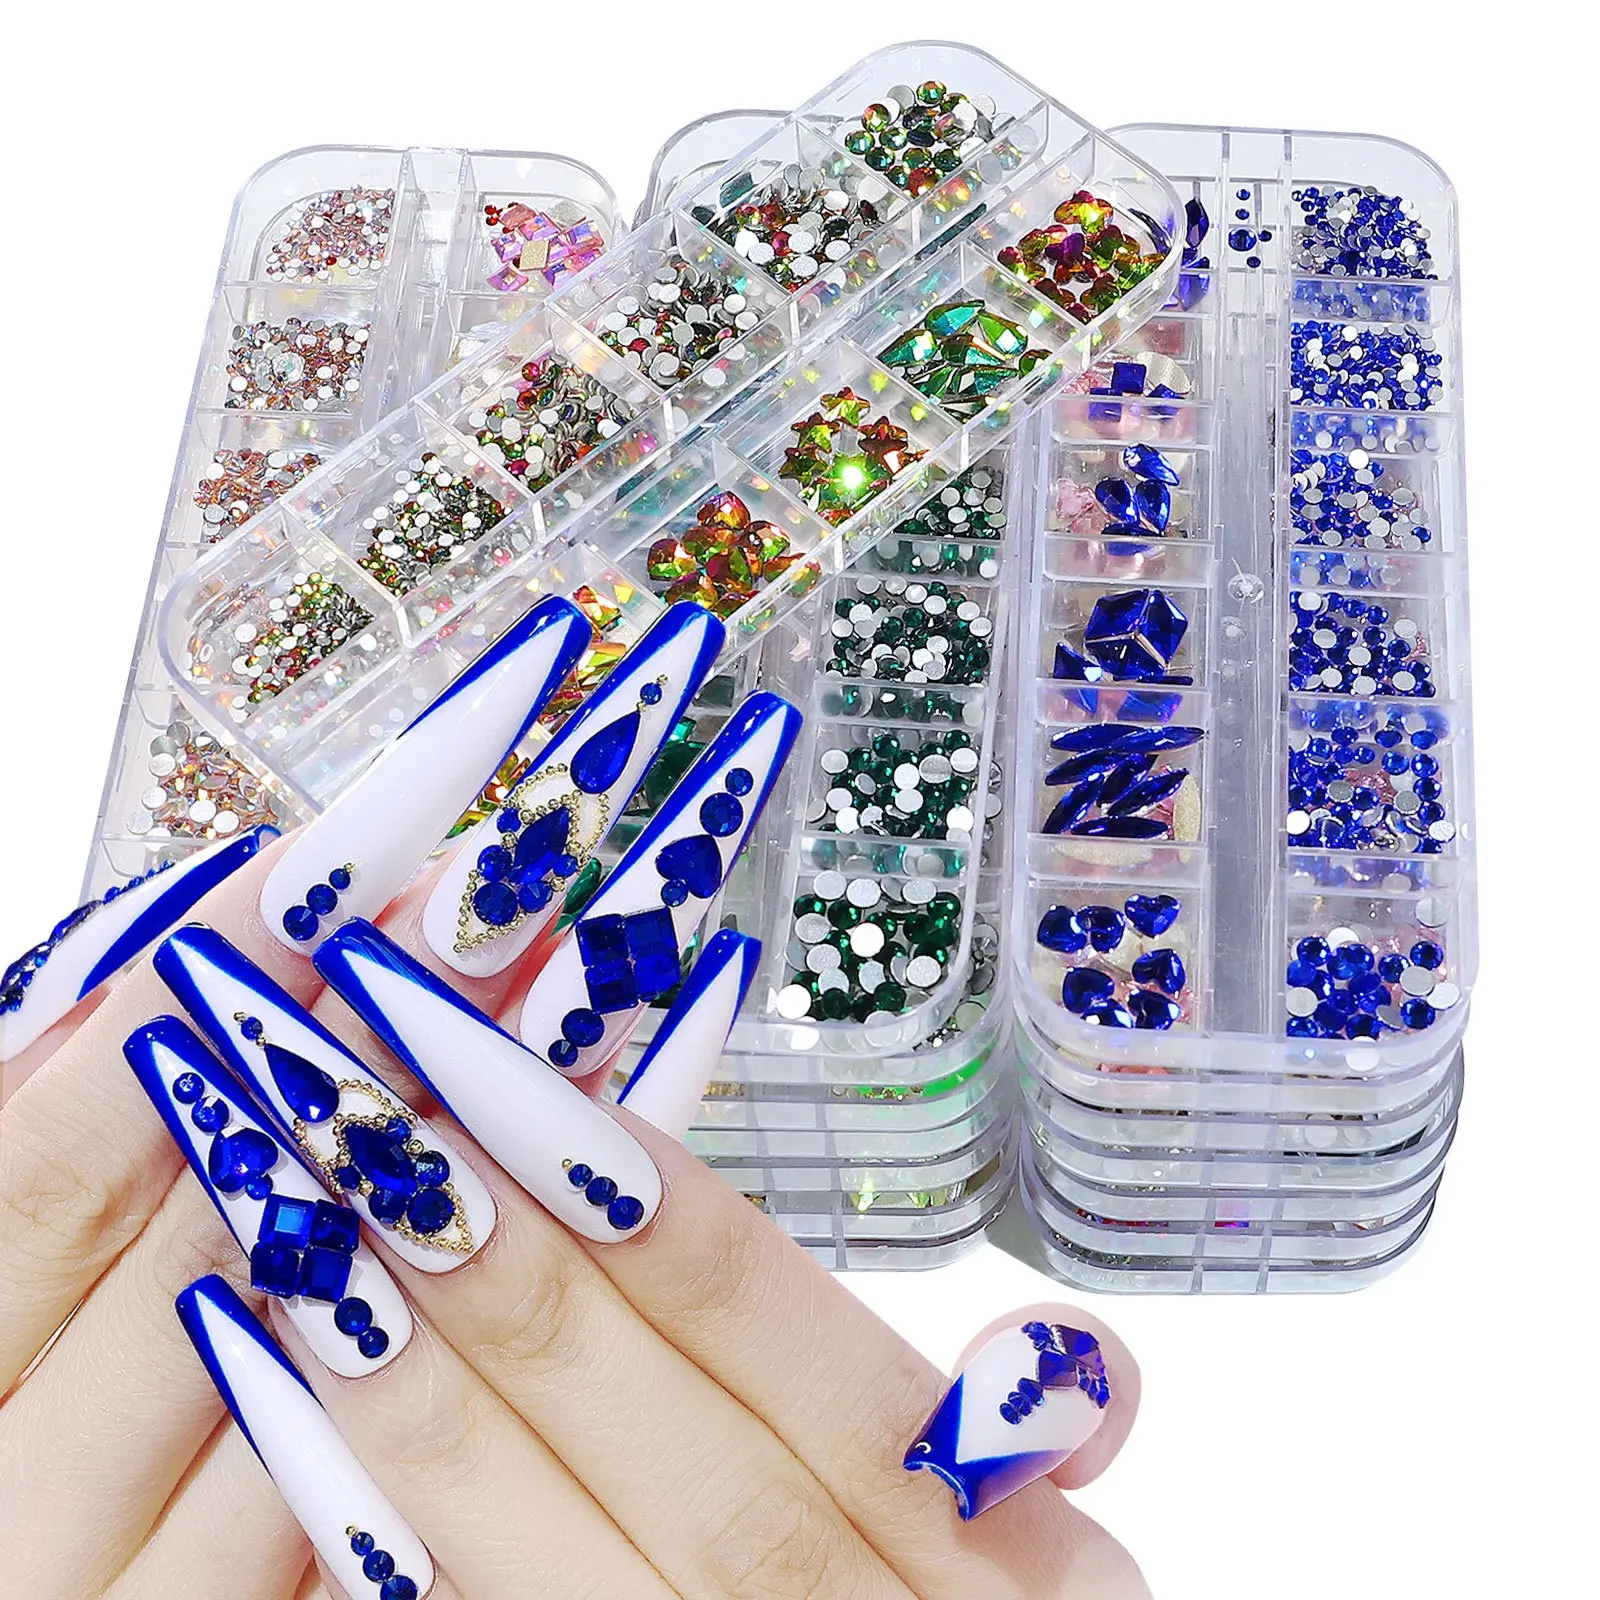 New Nail Accessories Colorful Alloy Nail Art Decorations Glitter Rhinestones Mixed Triangle Tips Accessories